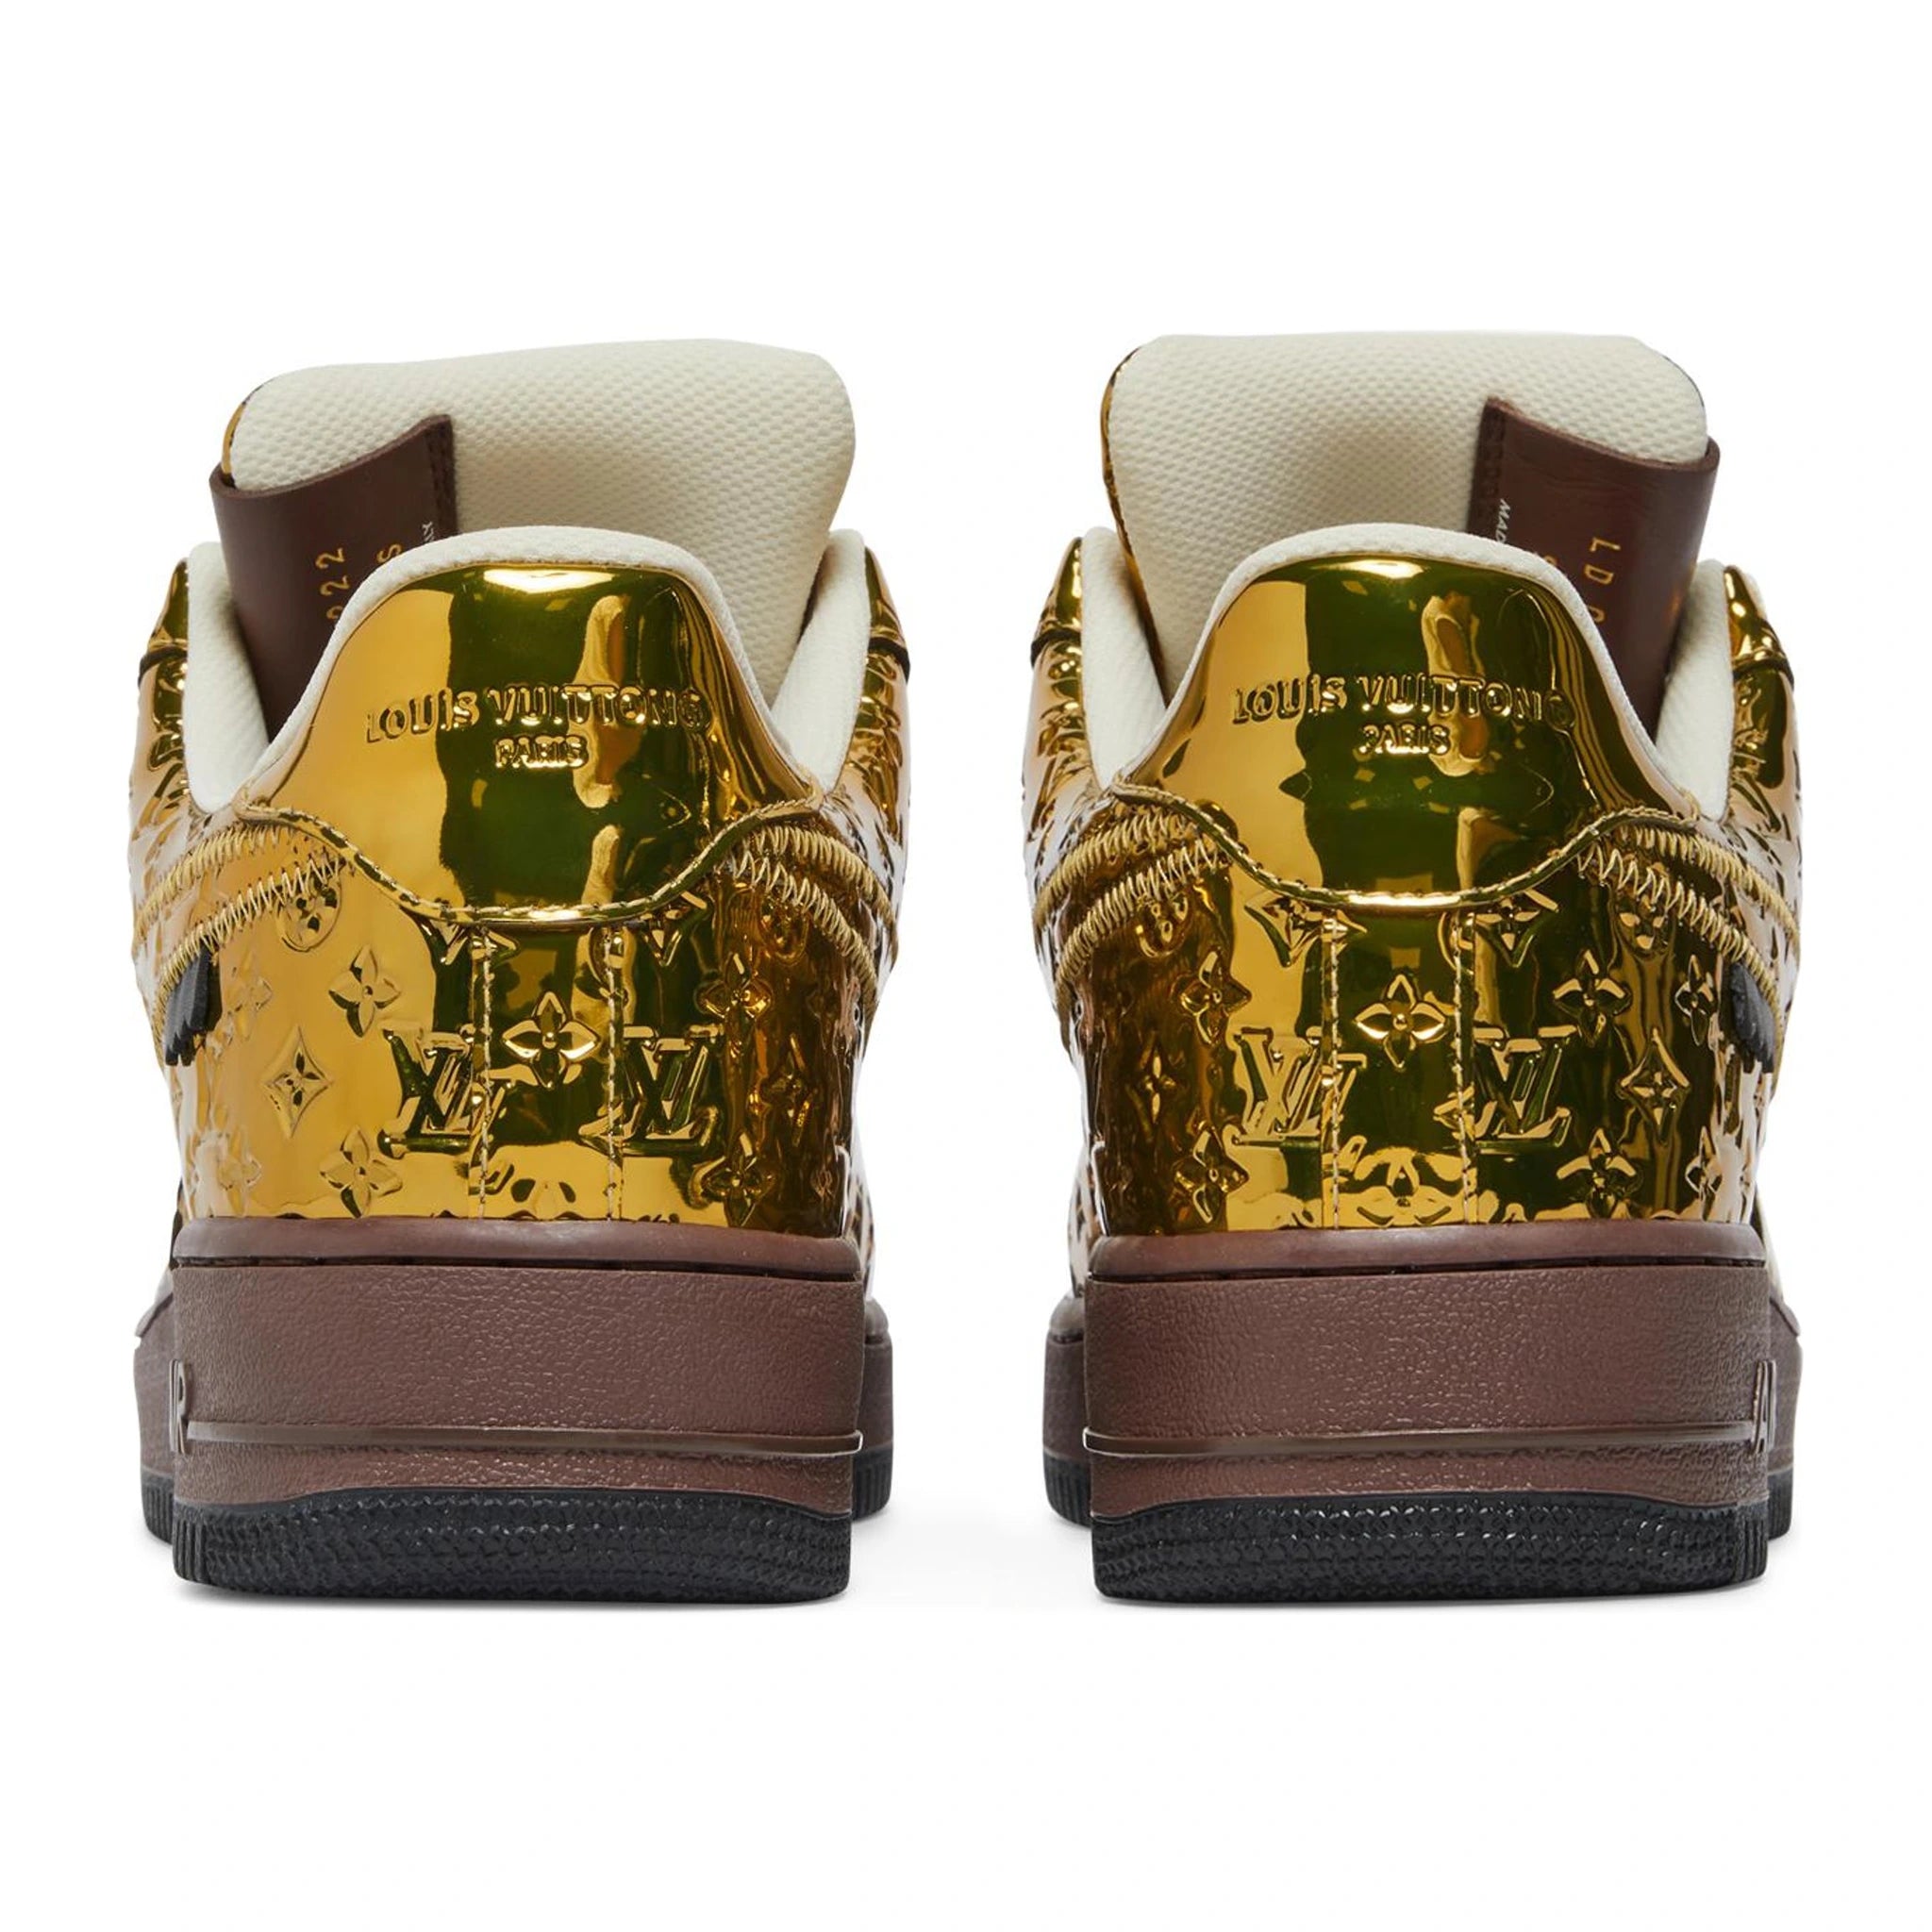 Back view of Louis Vuitton x Nike Air Force 1 Low Metallic Gold 1A9VG1